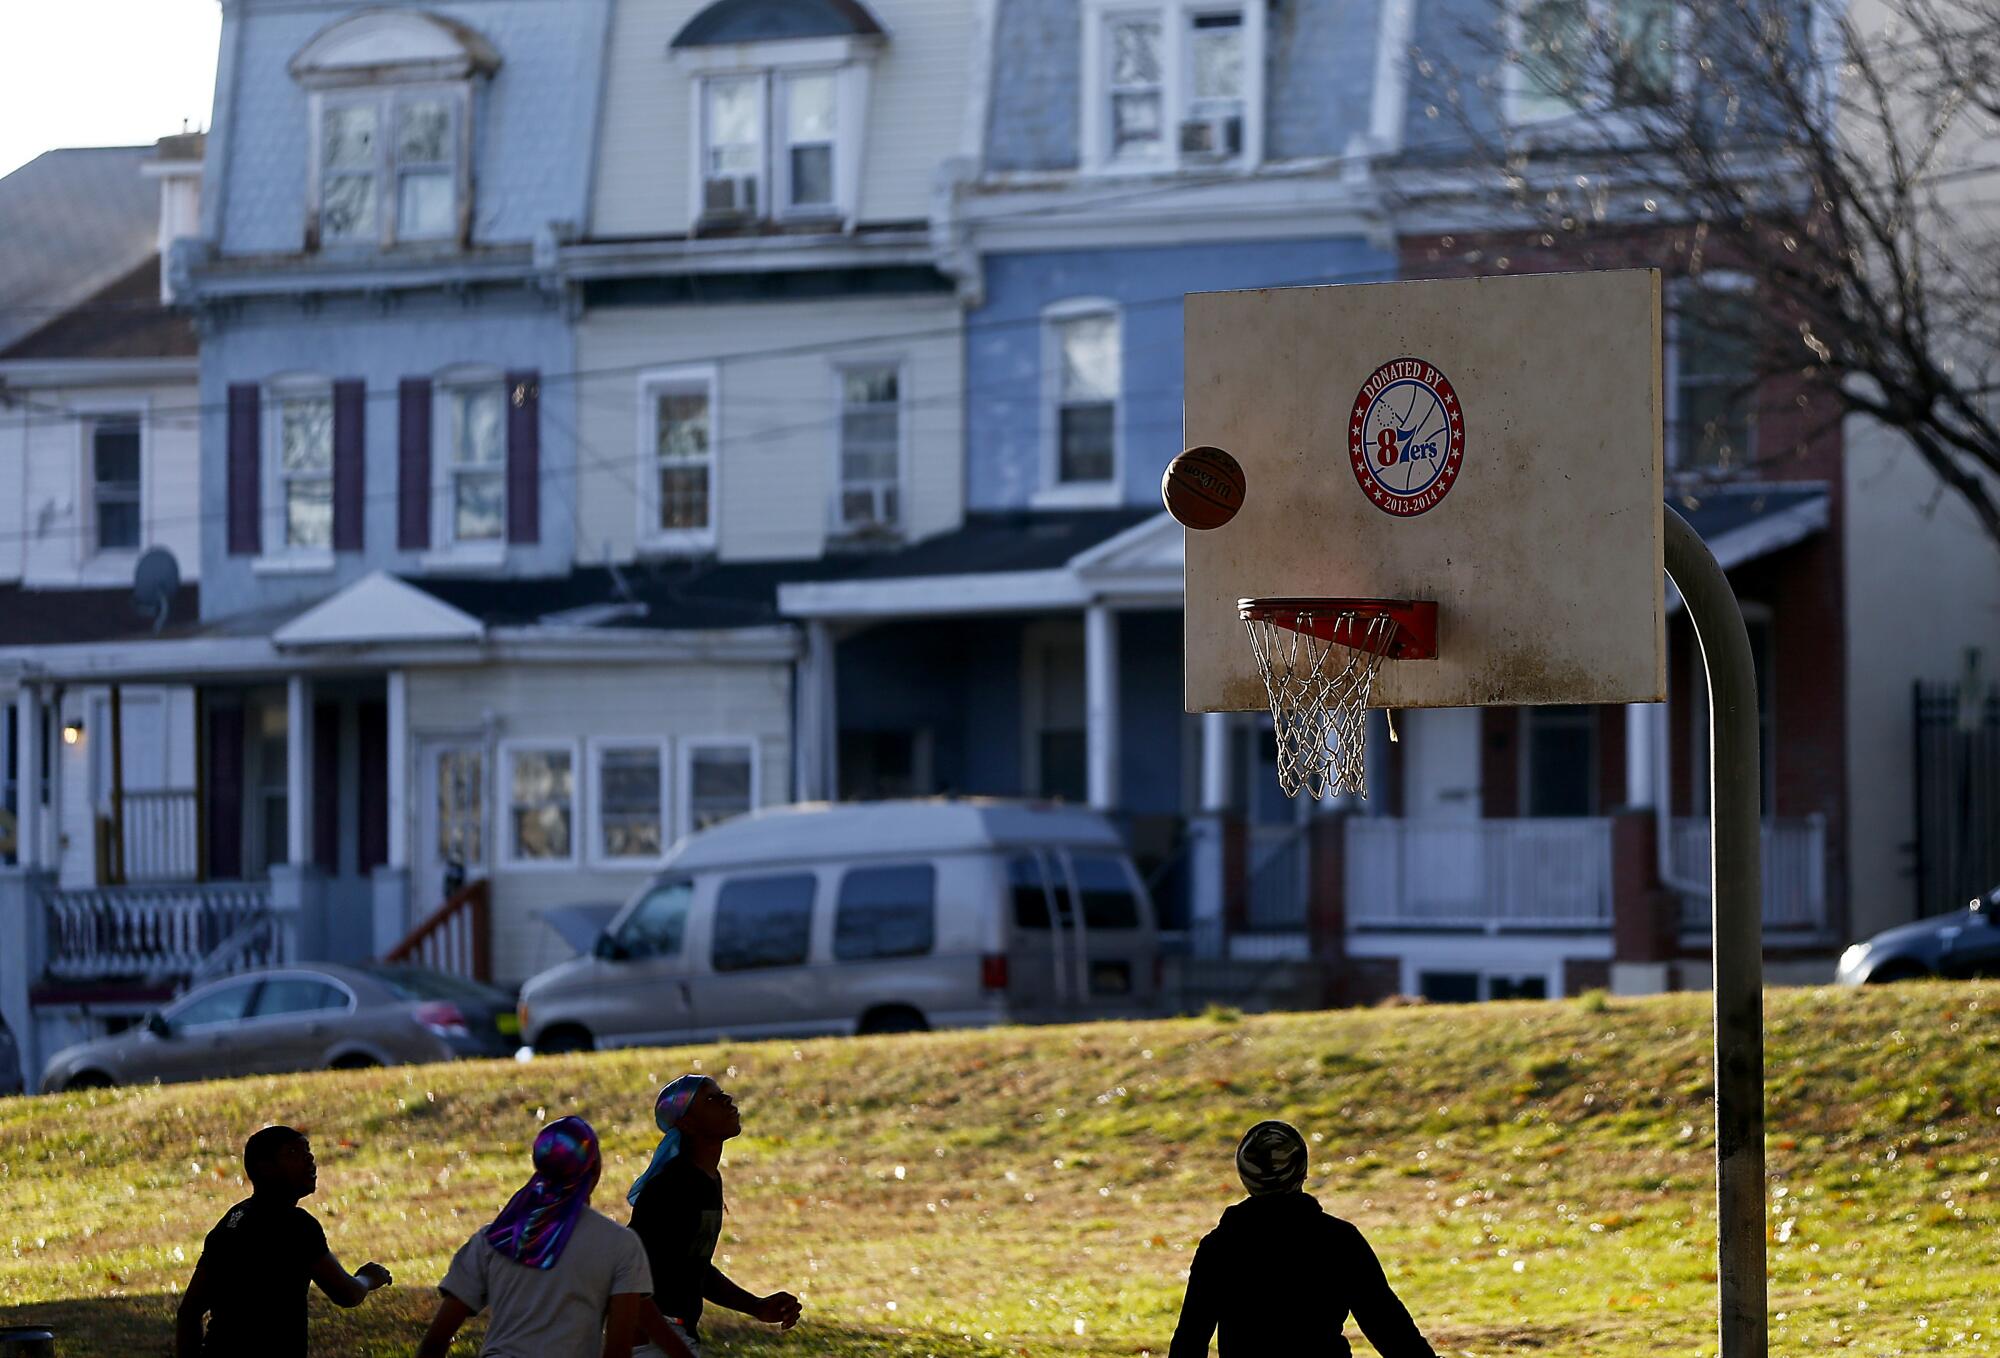 Youths play basketball on a court beneath Interstate 95 in West Wilmington.